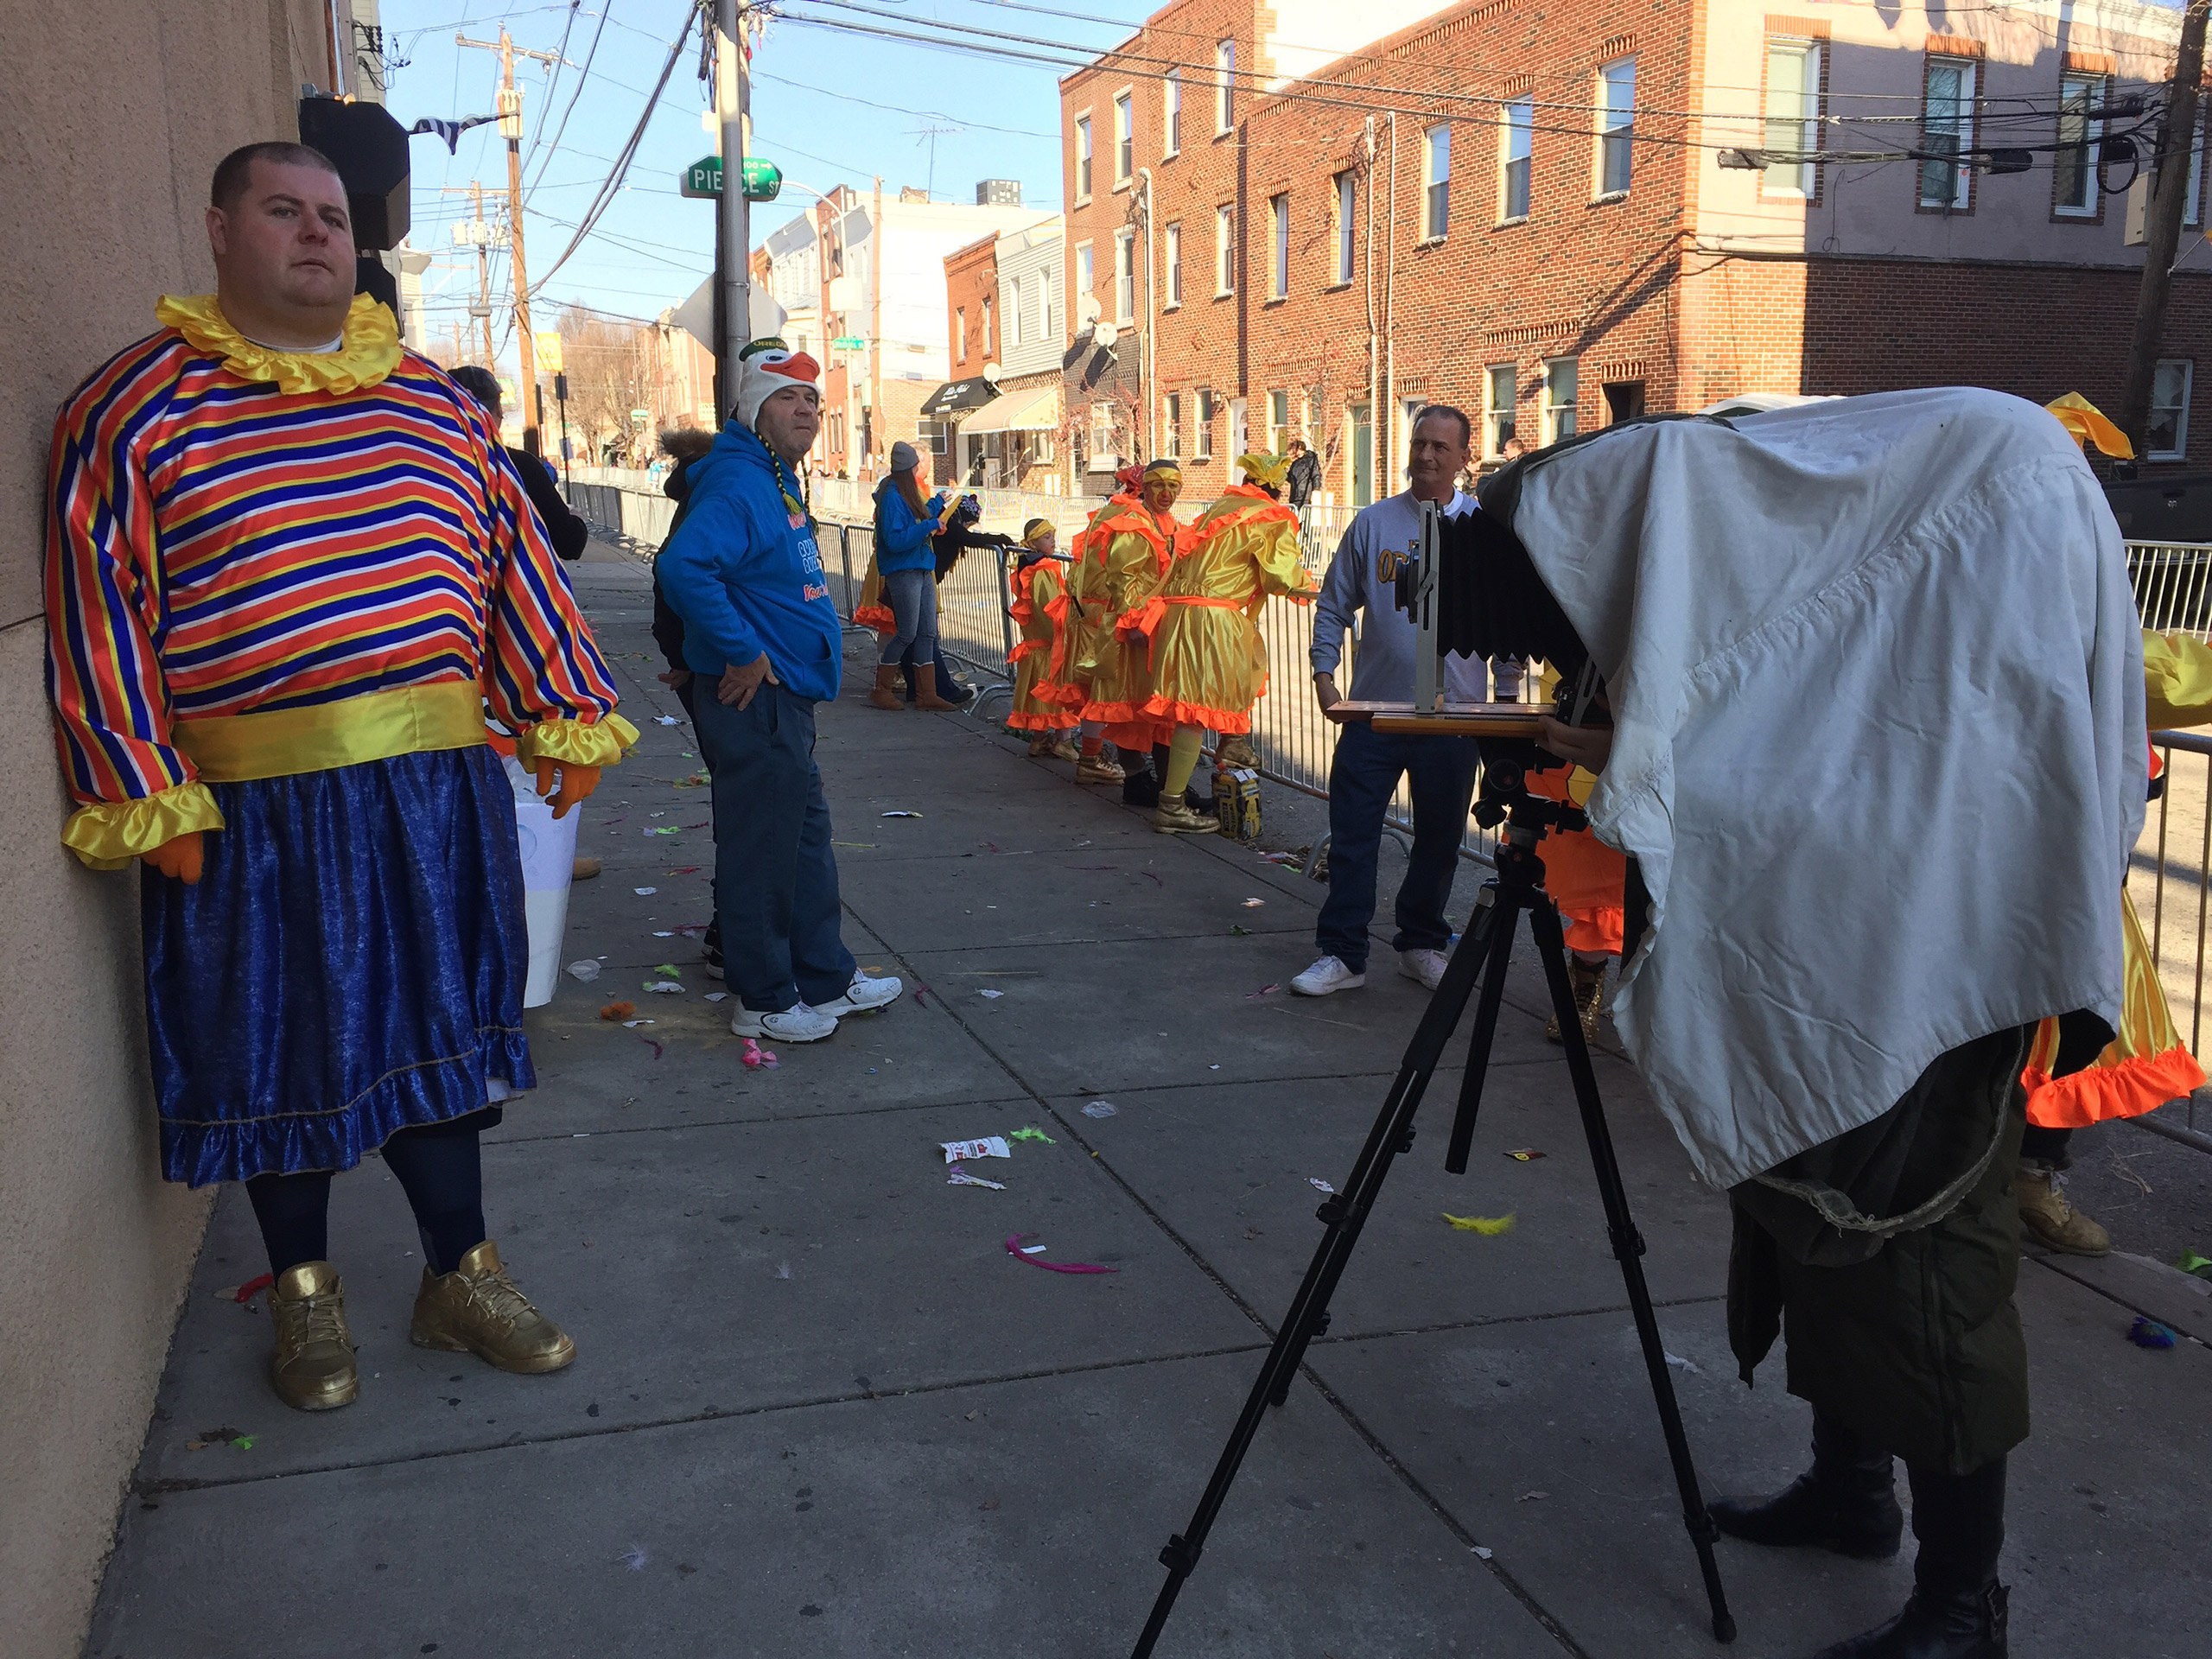 Andrea Modica photographs a member of the Wenche brigade during the annual Mummers parade. (Mike Arrison)